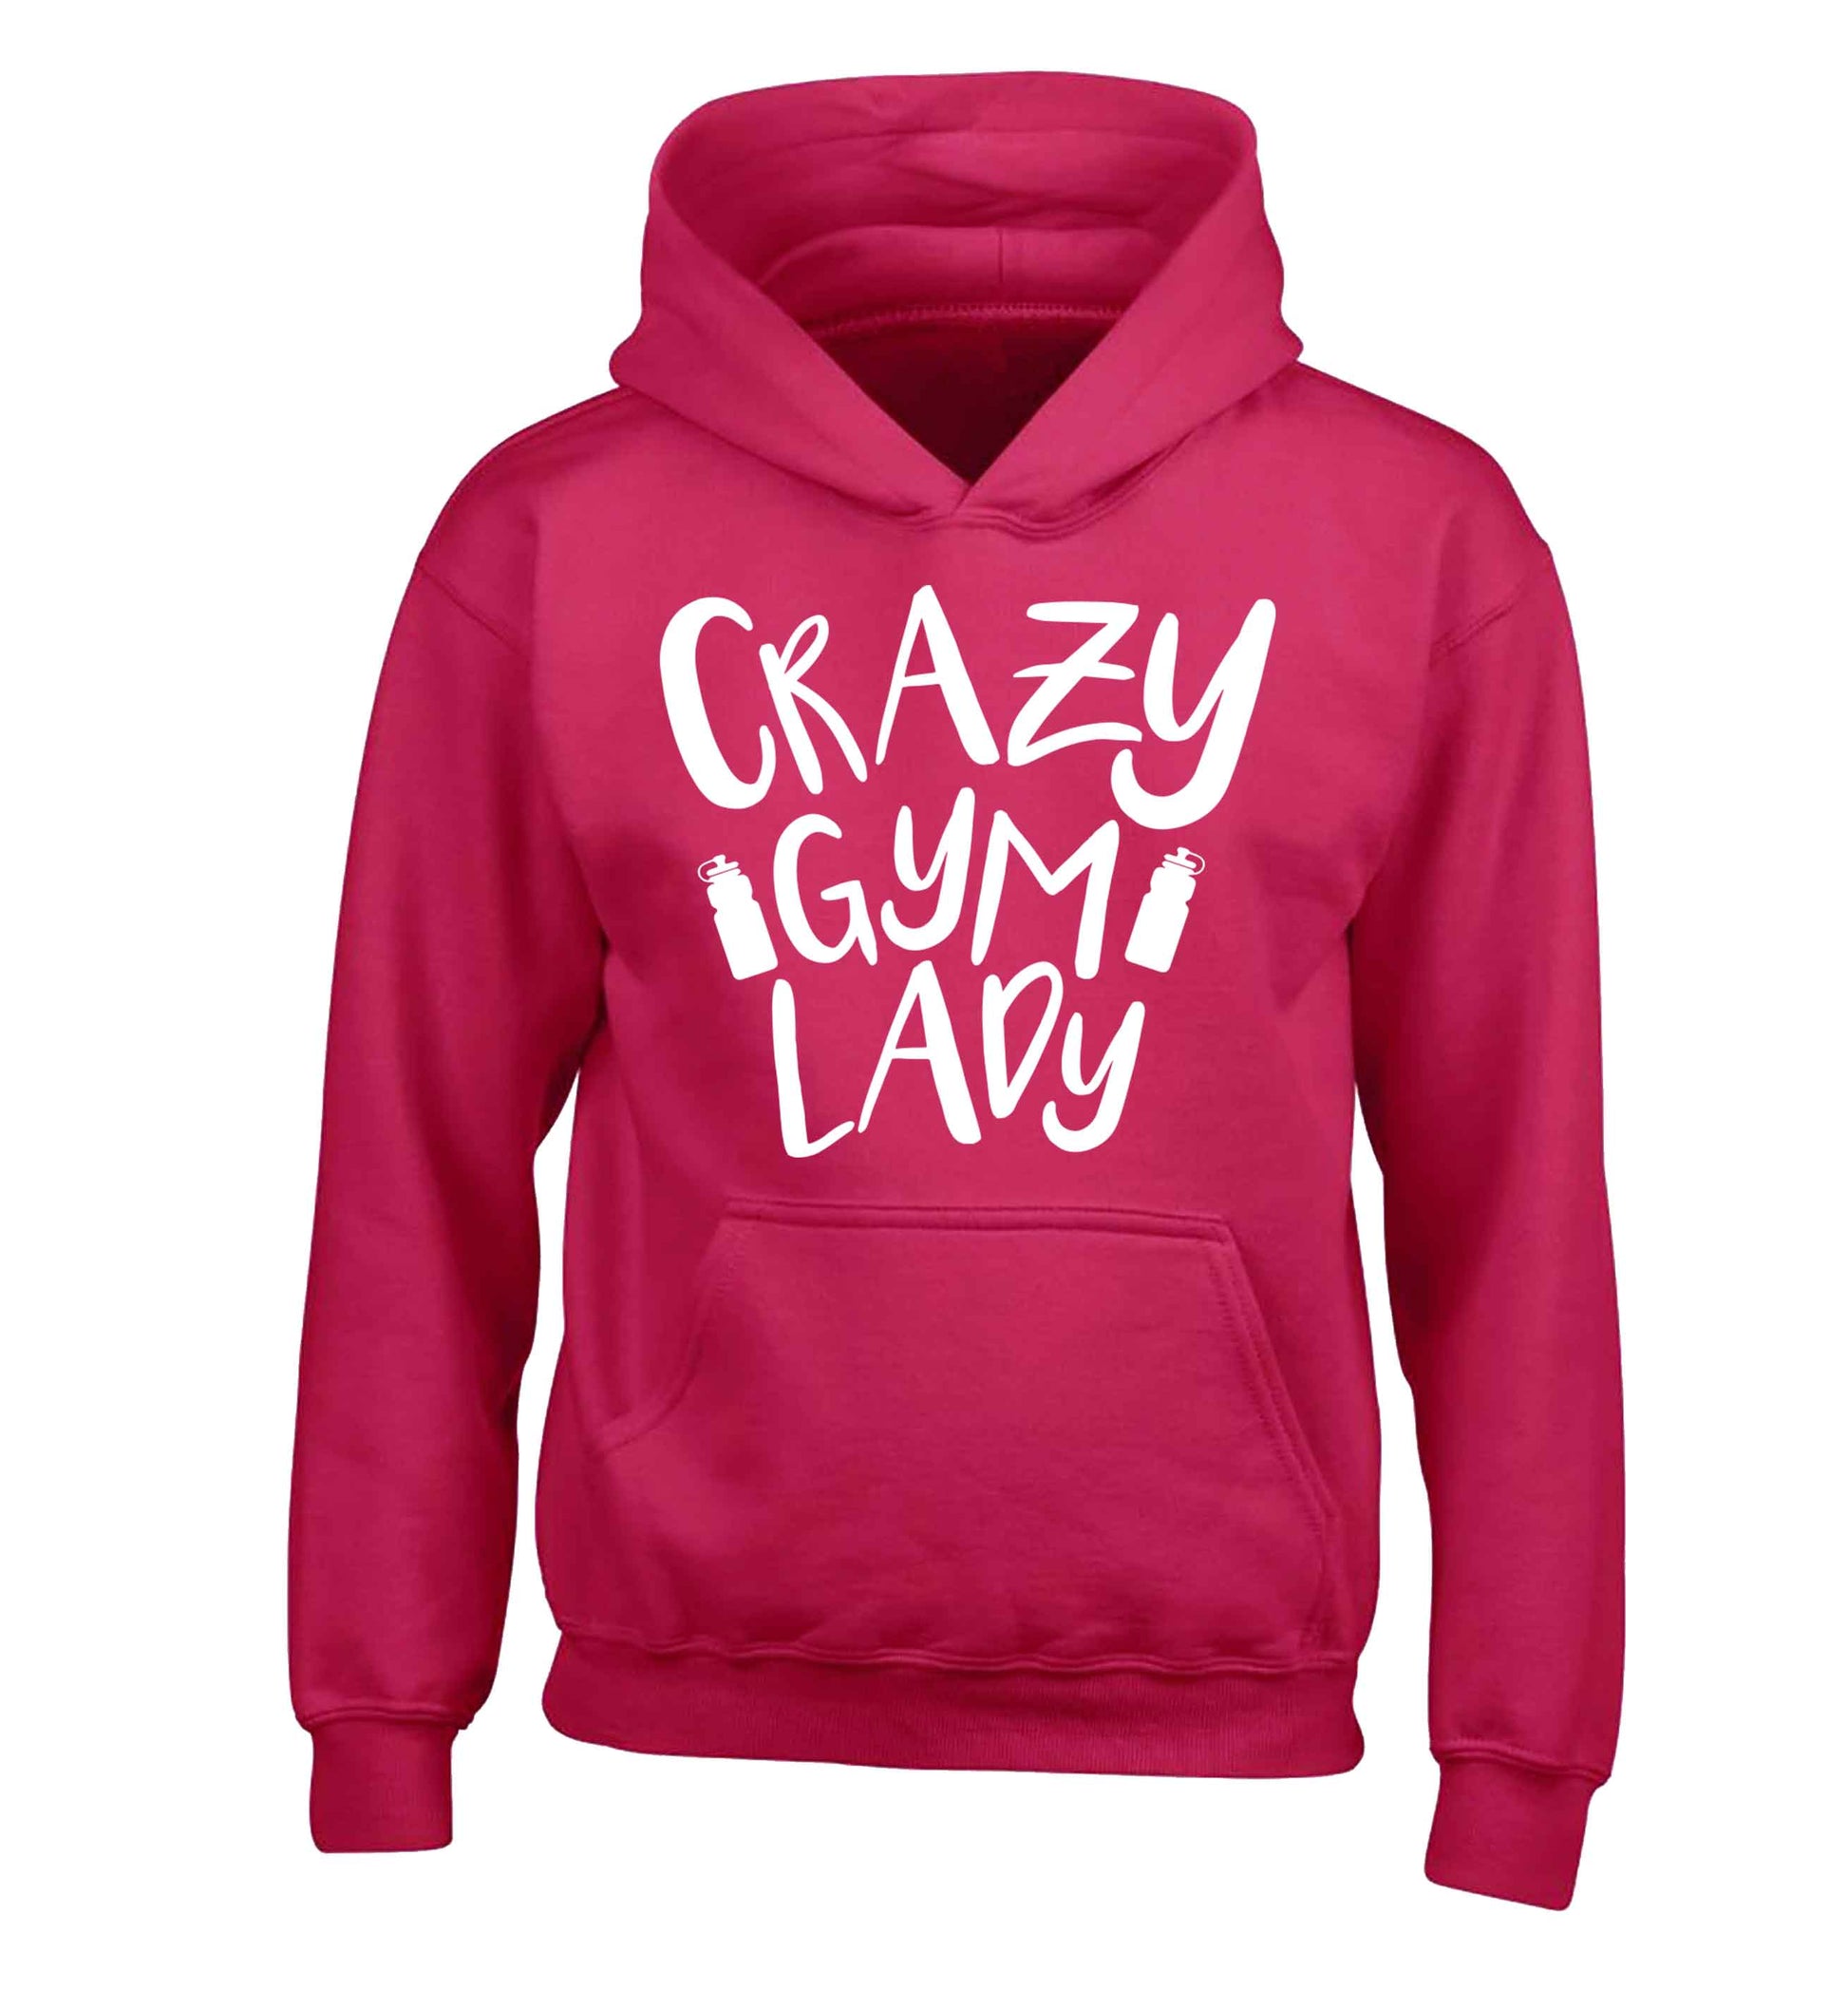 Crazy gym lady children's pink hoodie 12-13 Years